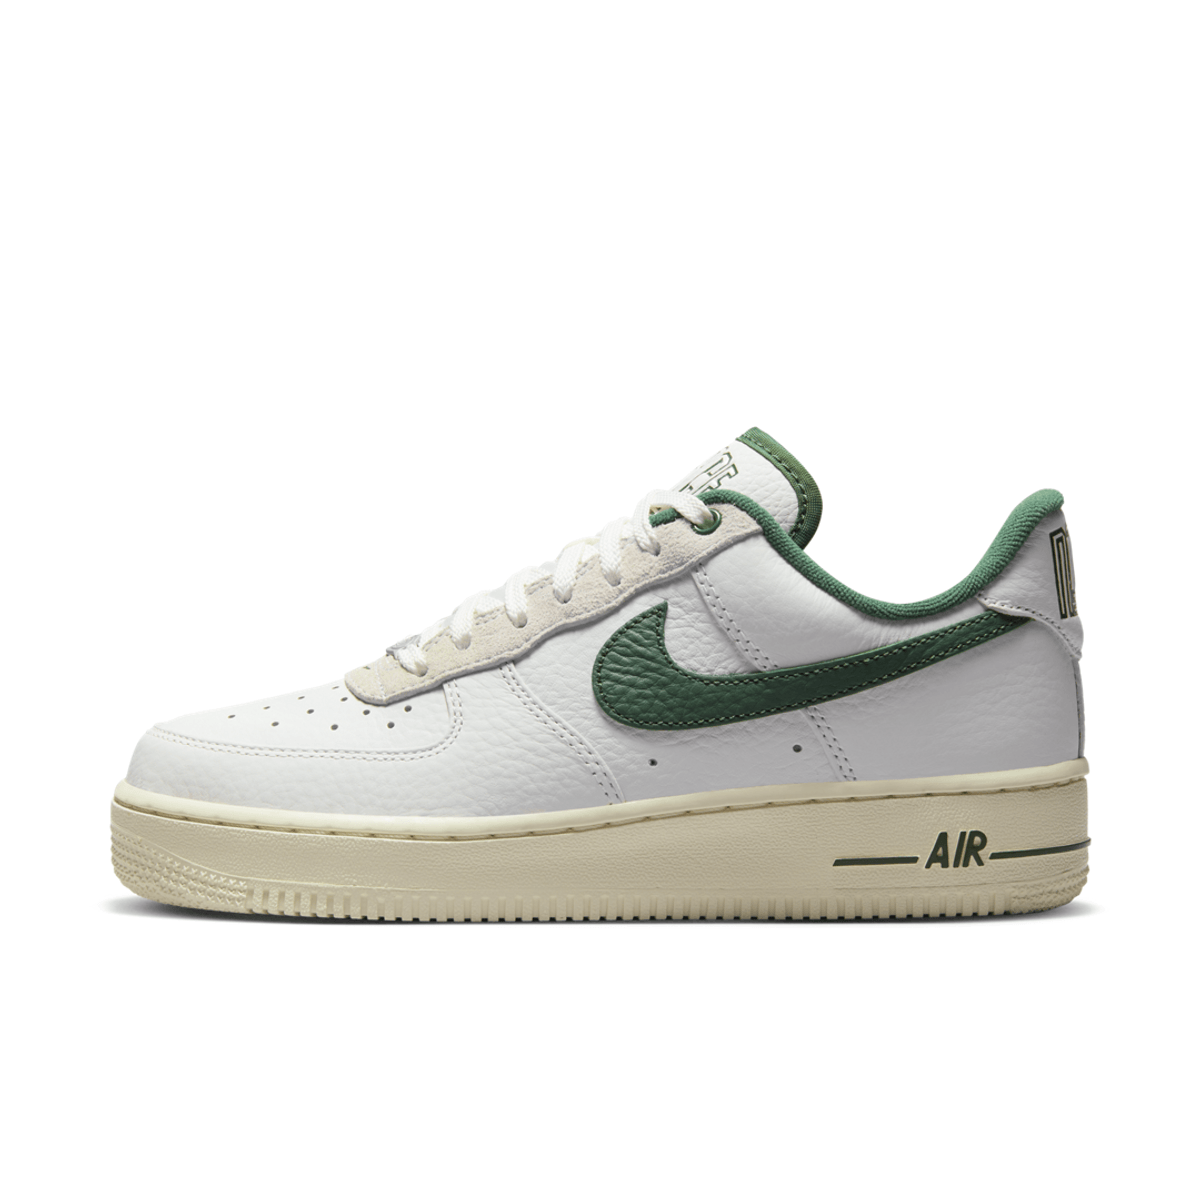 Nike Air Force 1 Low '07 LX Command Force Gorge Green (W)